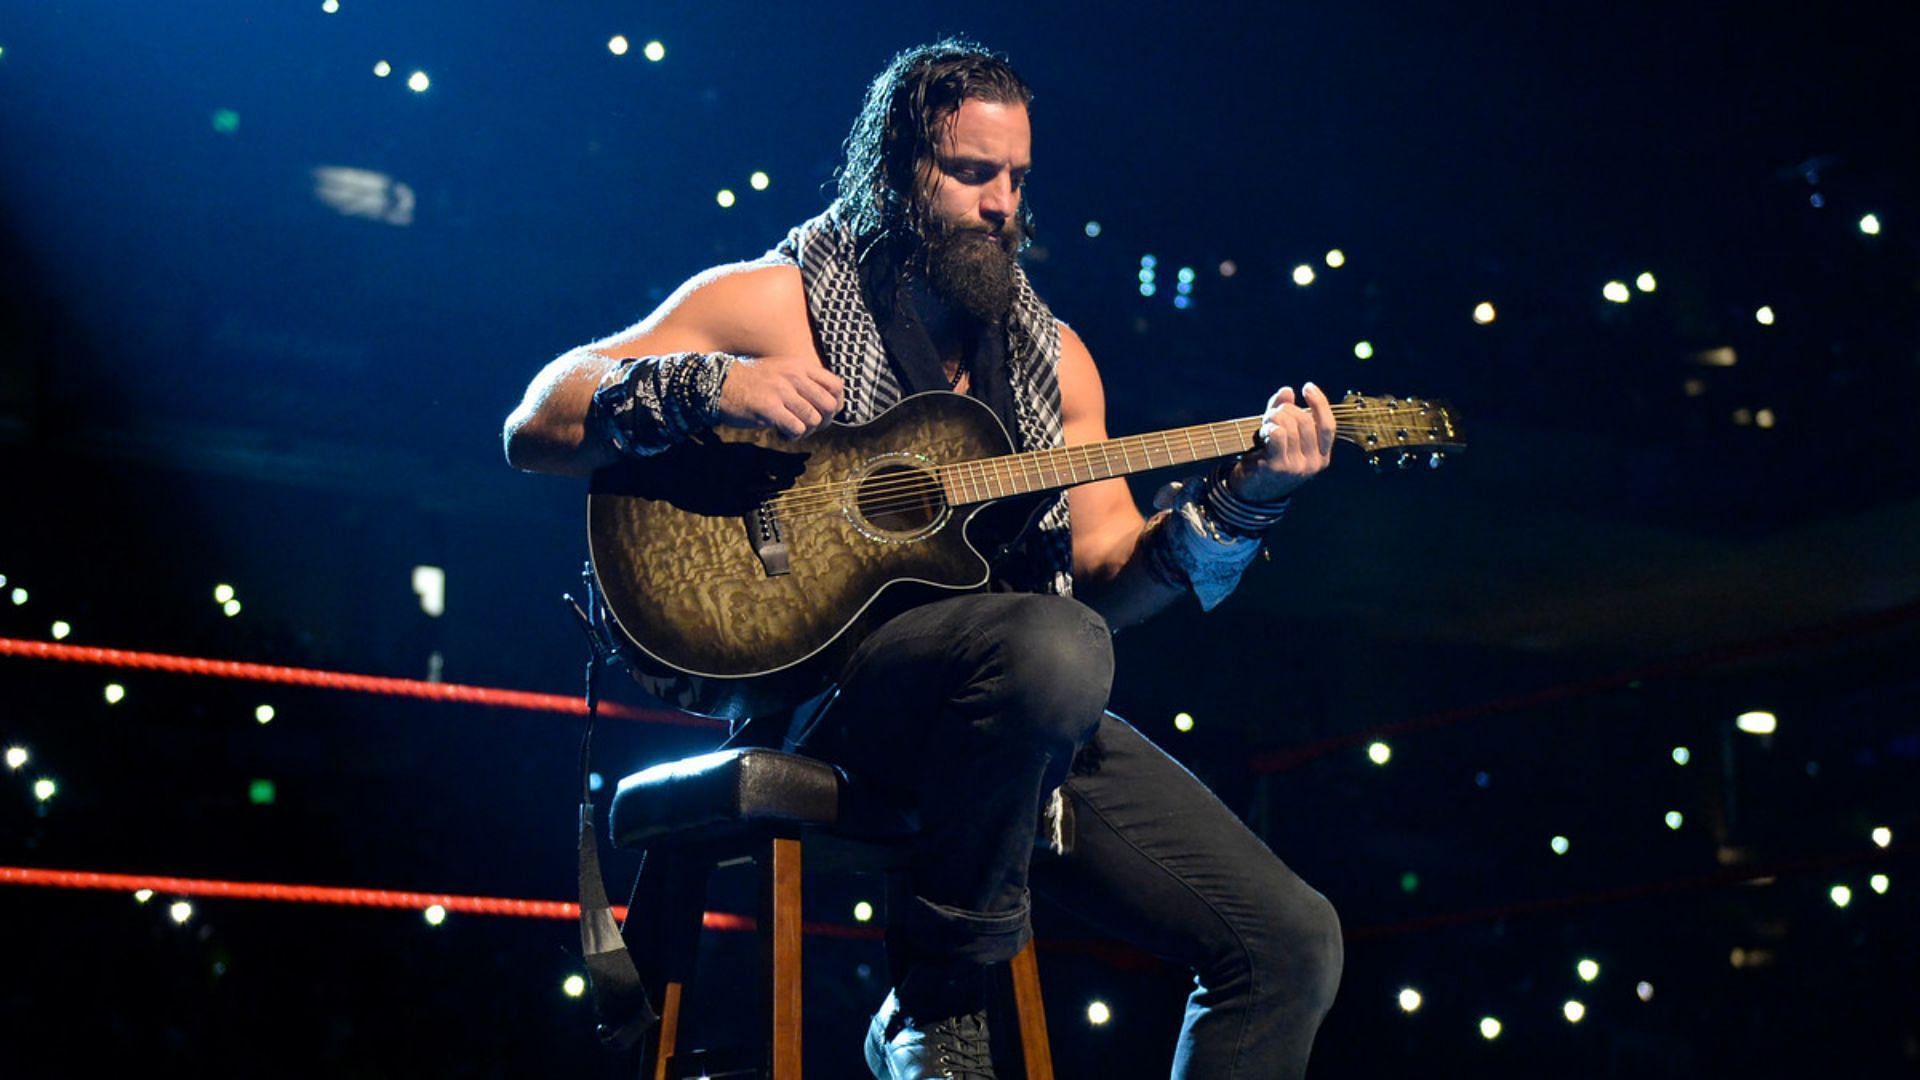 WWE Superstar Elias is a free agent